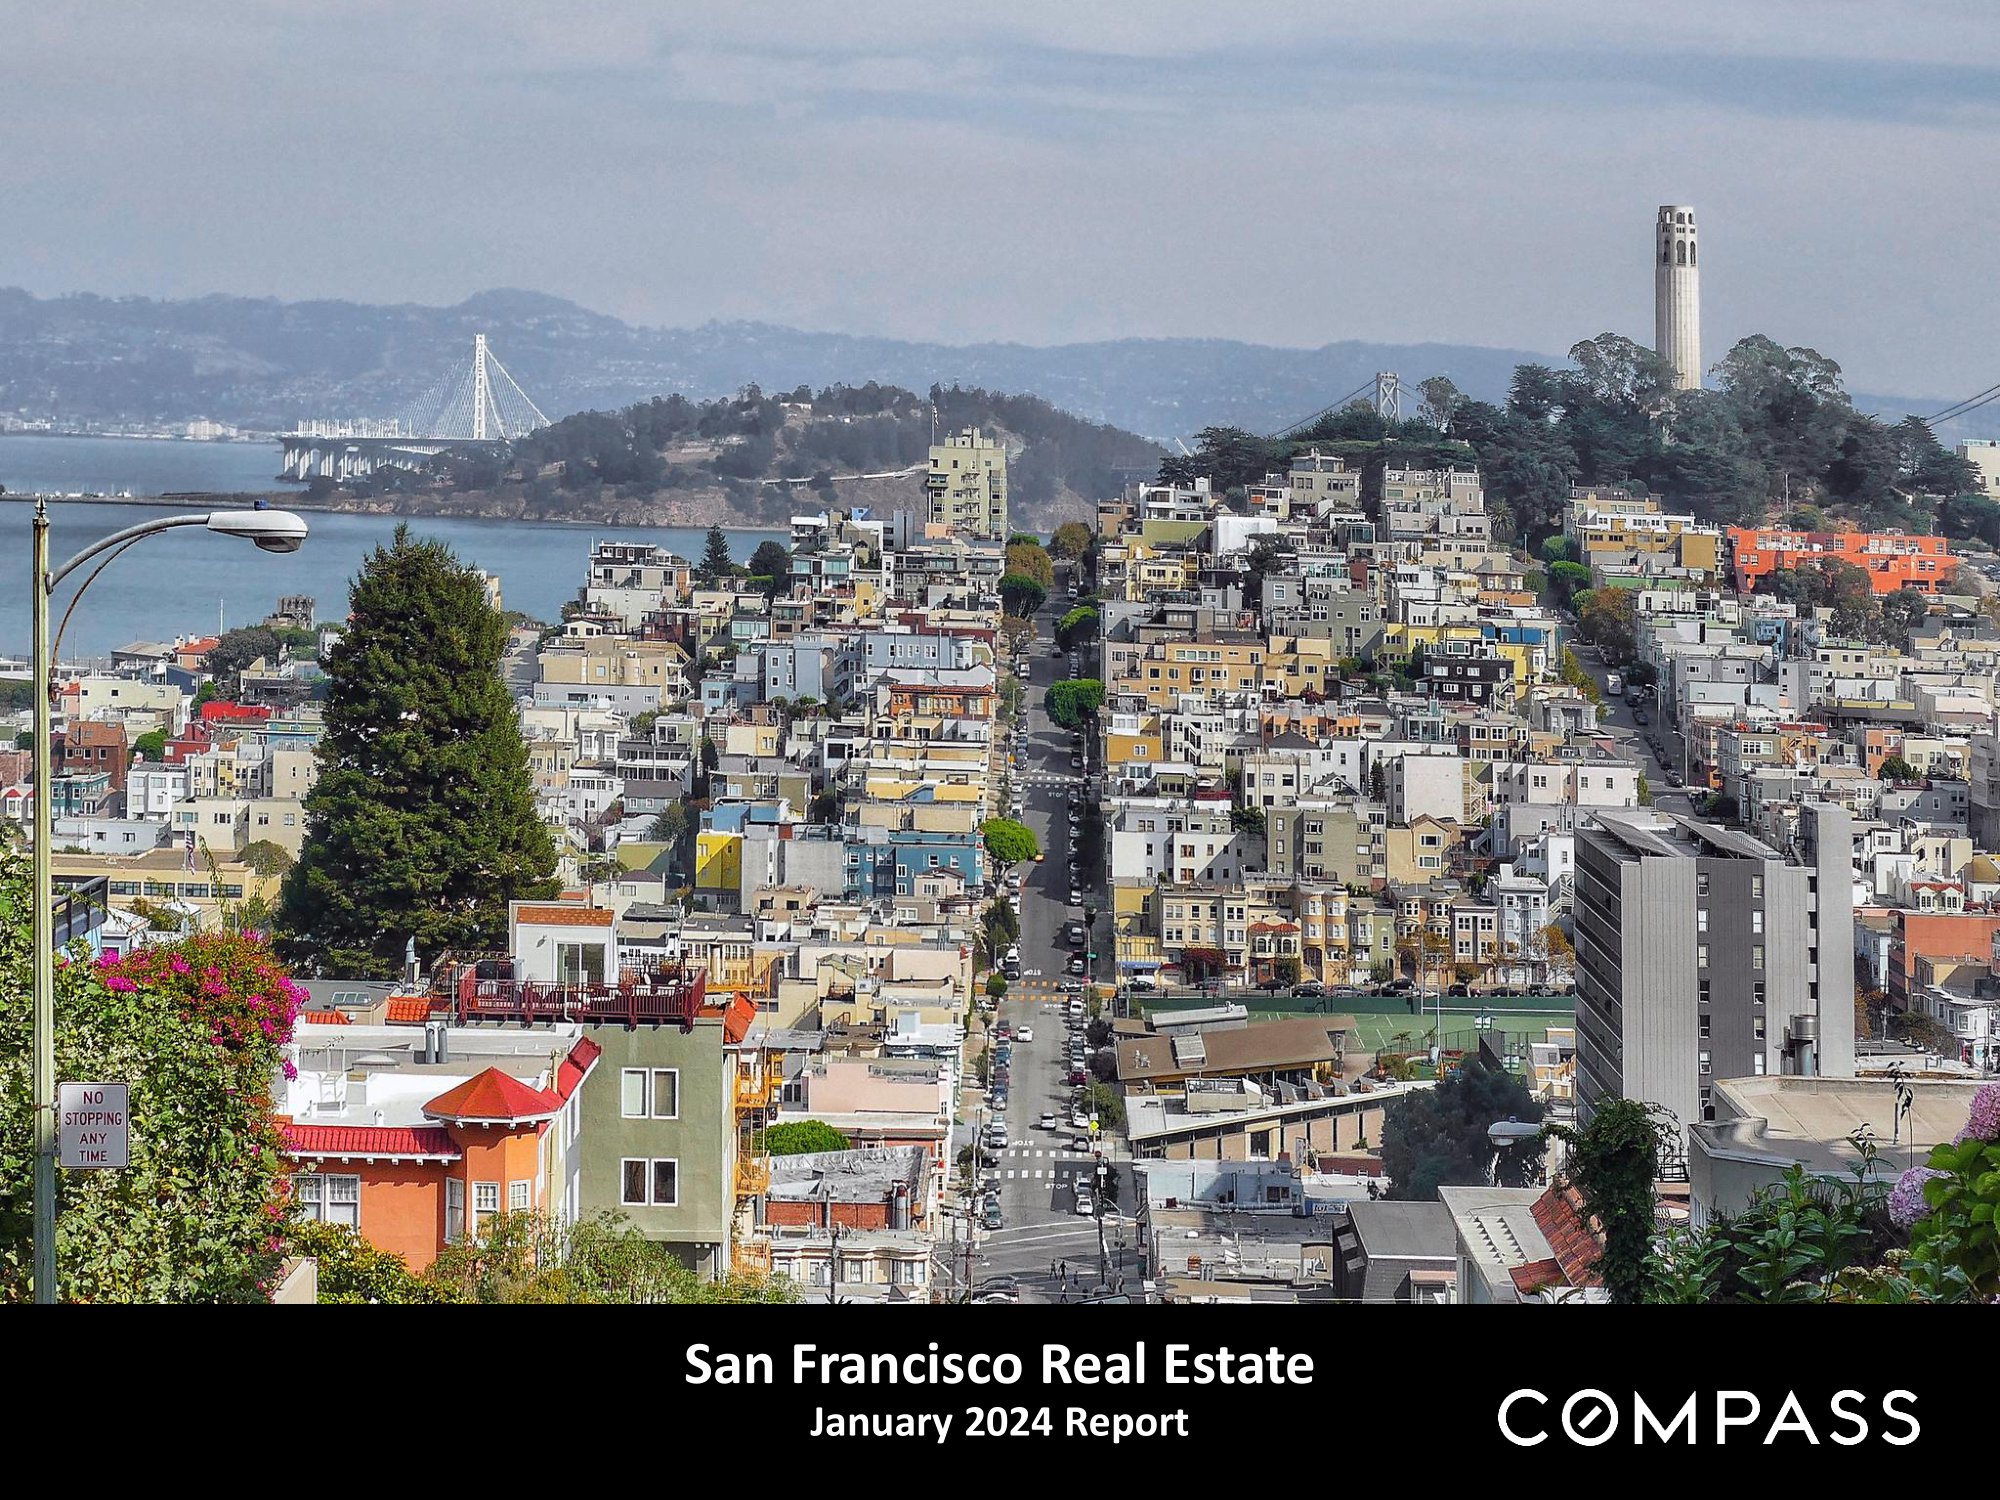 San Francisco real estate market overview: Explore the nuances of this market through our reliable report. Discover more about us now!